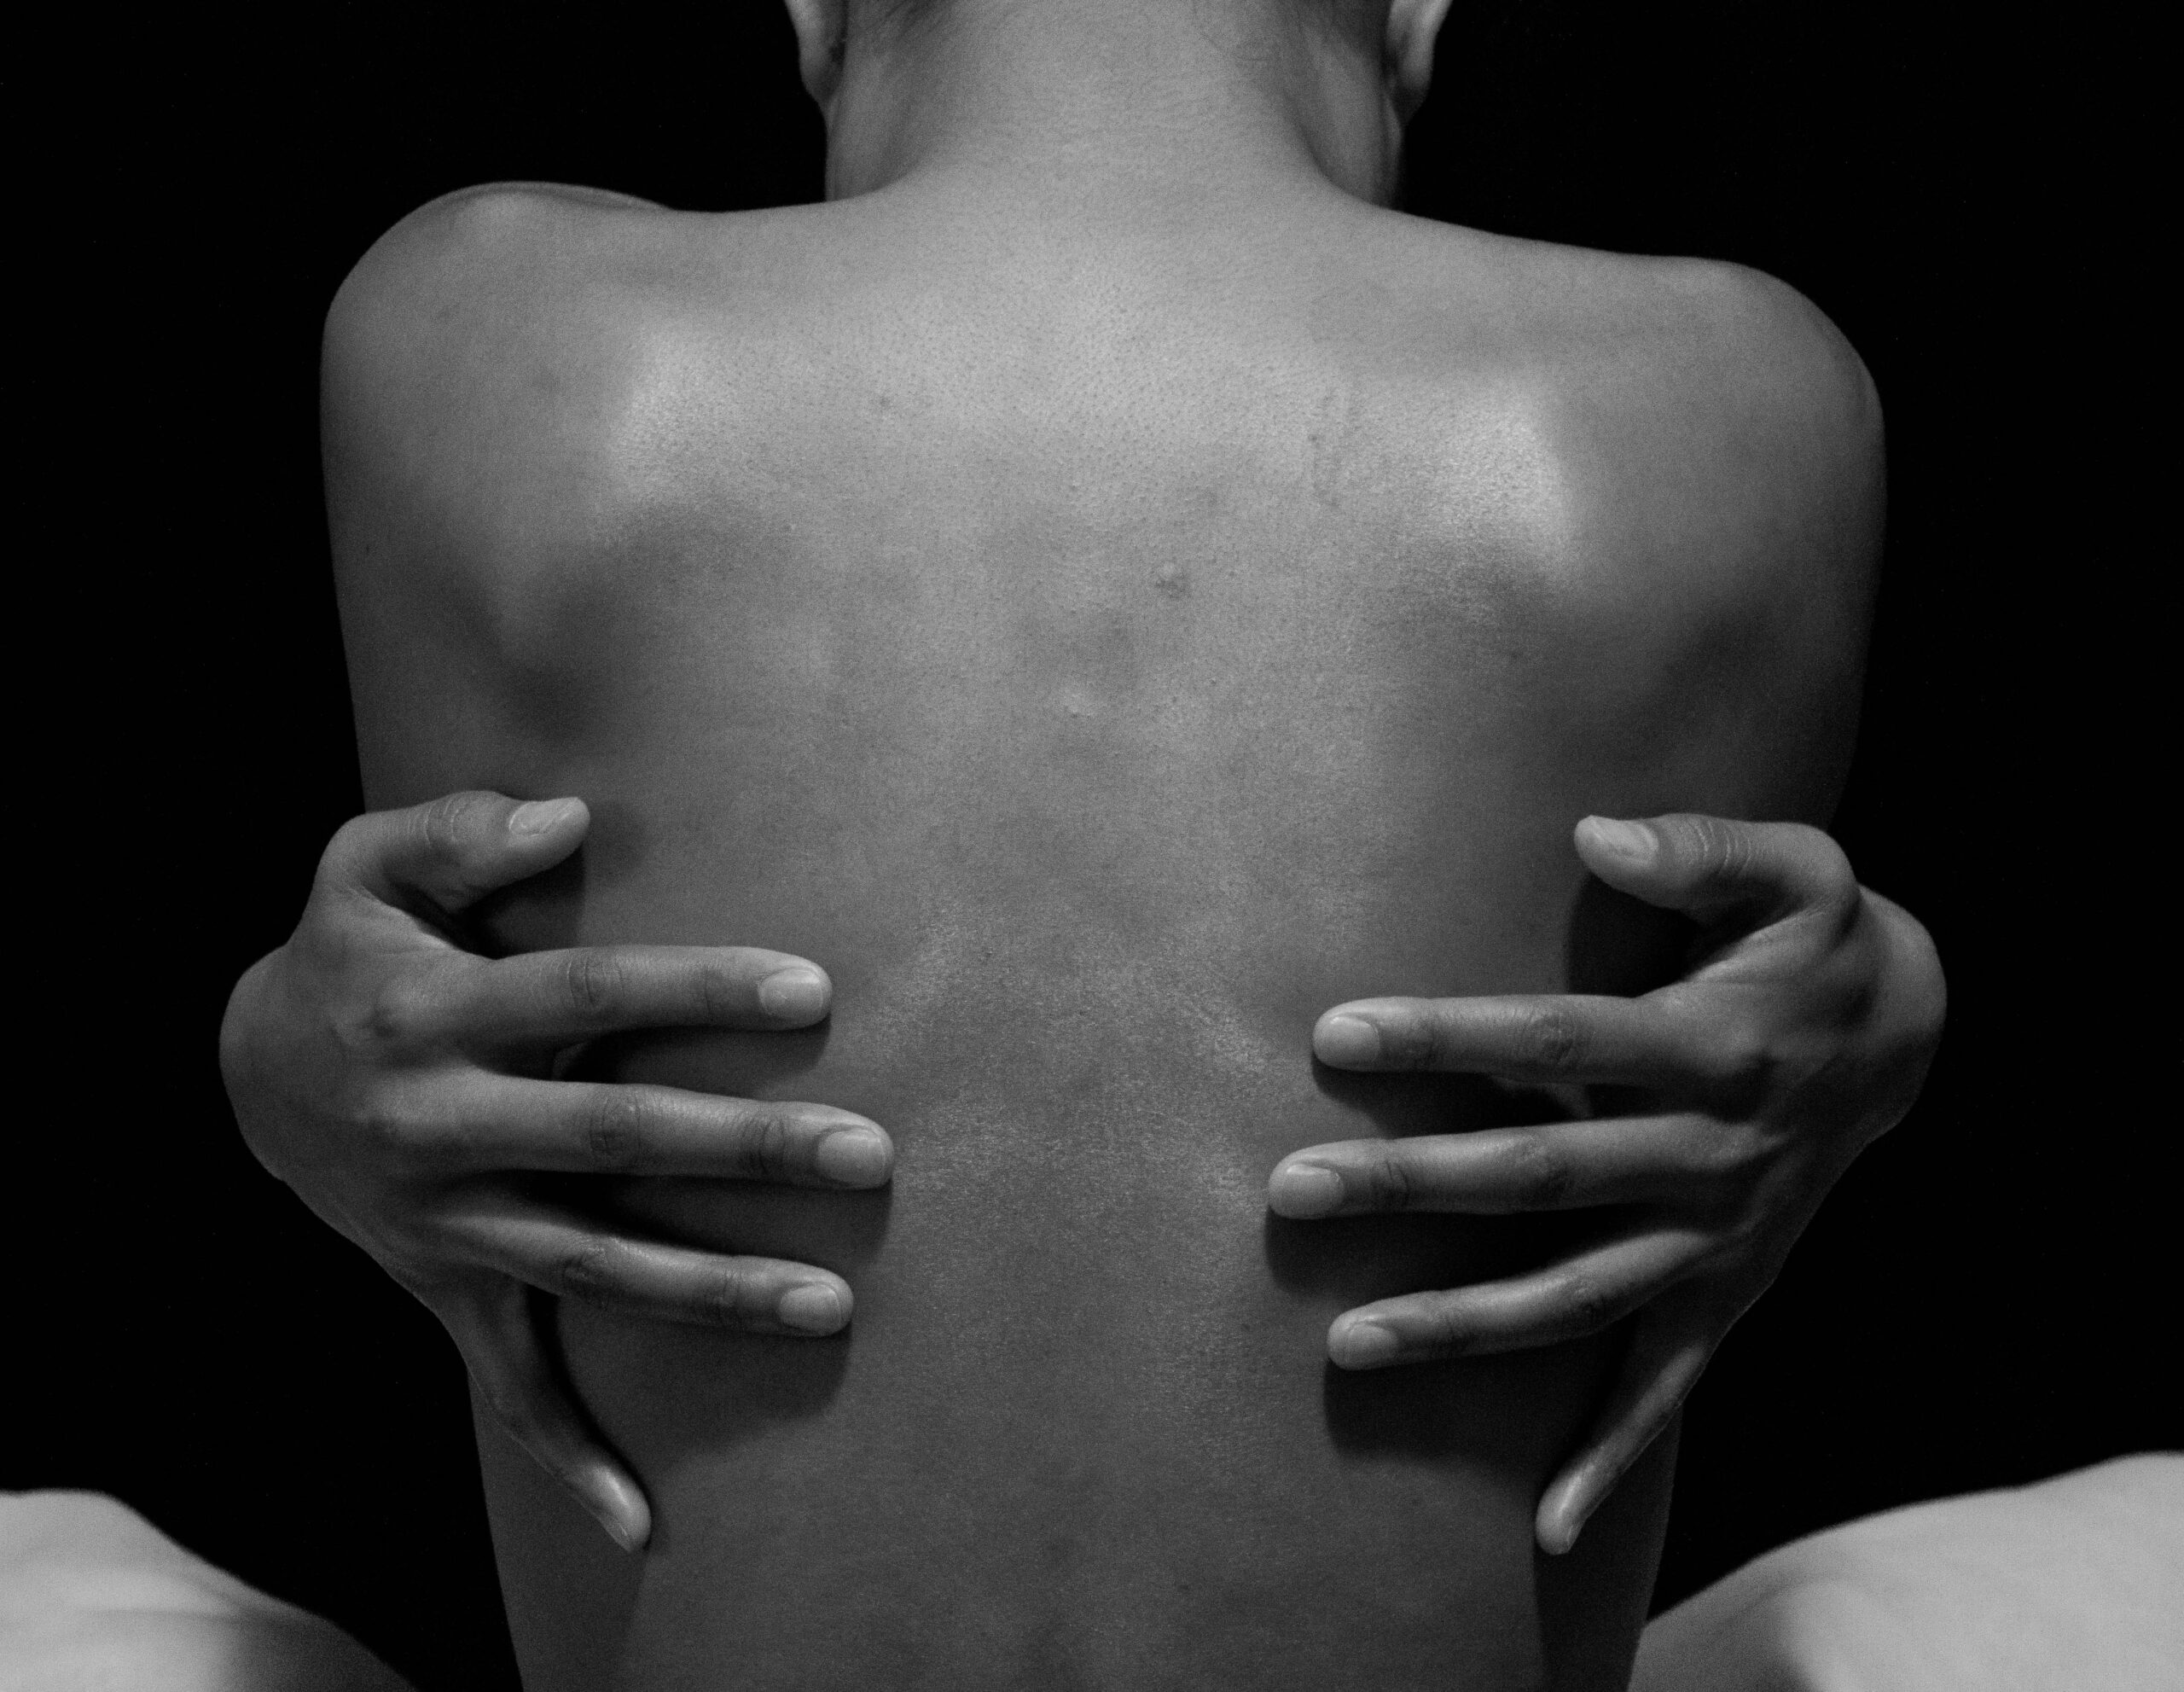 A woman with her back turned.